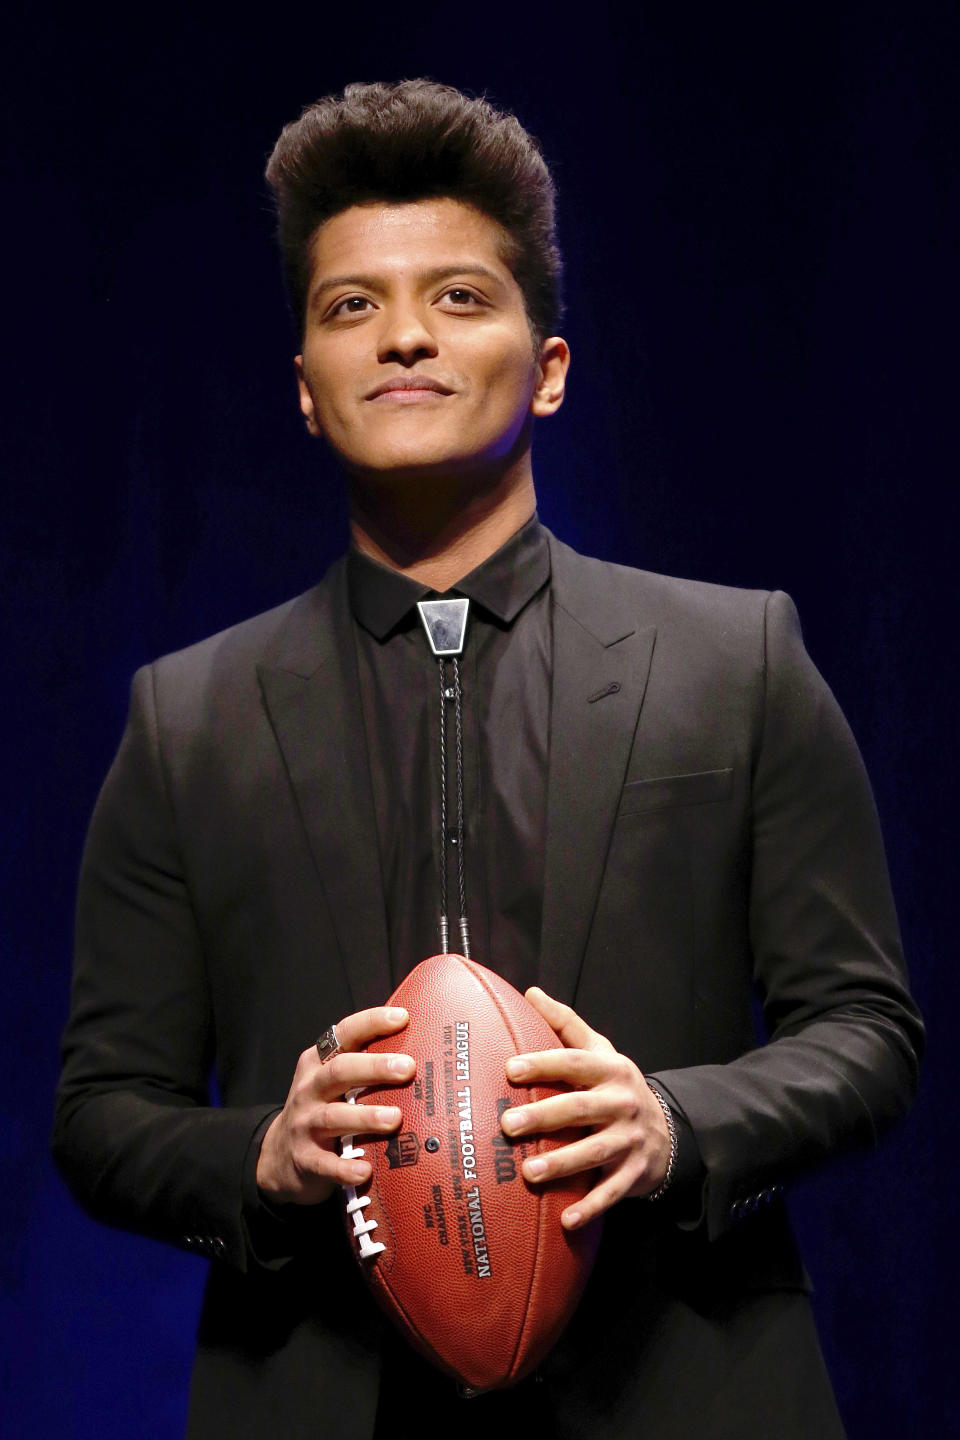 Bruno Mars who will headline the half-time show at the NFL Super Bowl XLVIII football game hold the game ball during a press conference Thursday, Jan. 30, 2014, in New York. (AP Photo/)